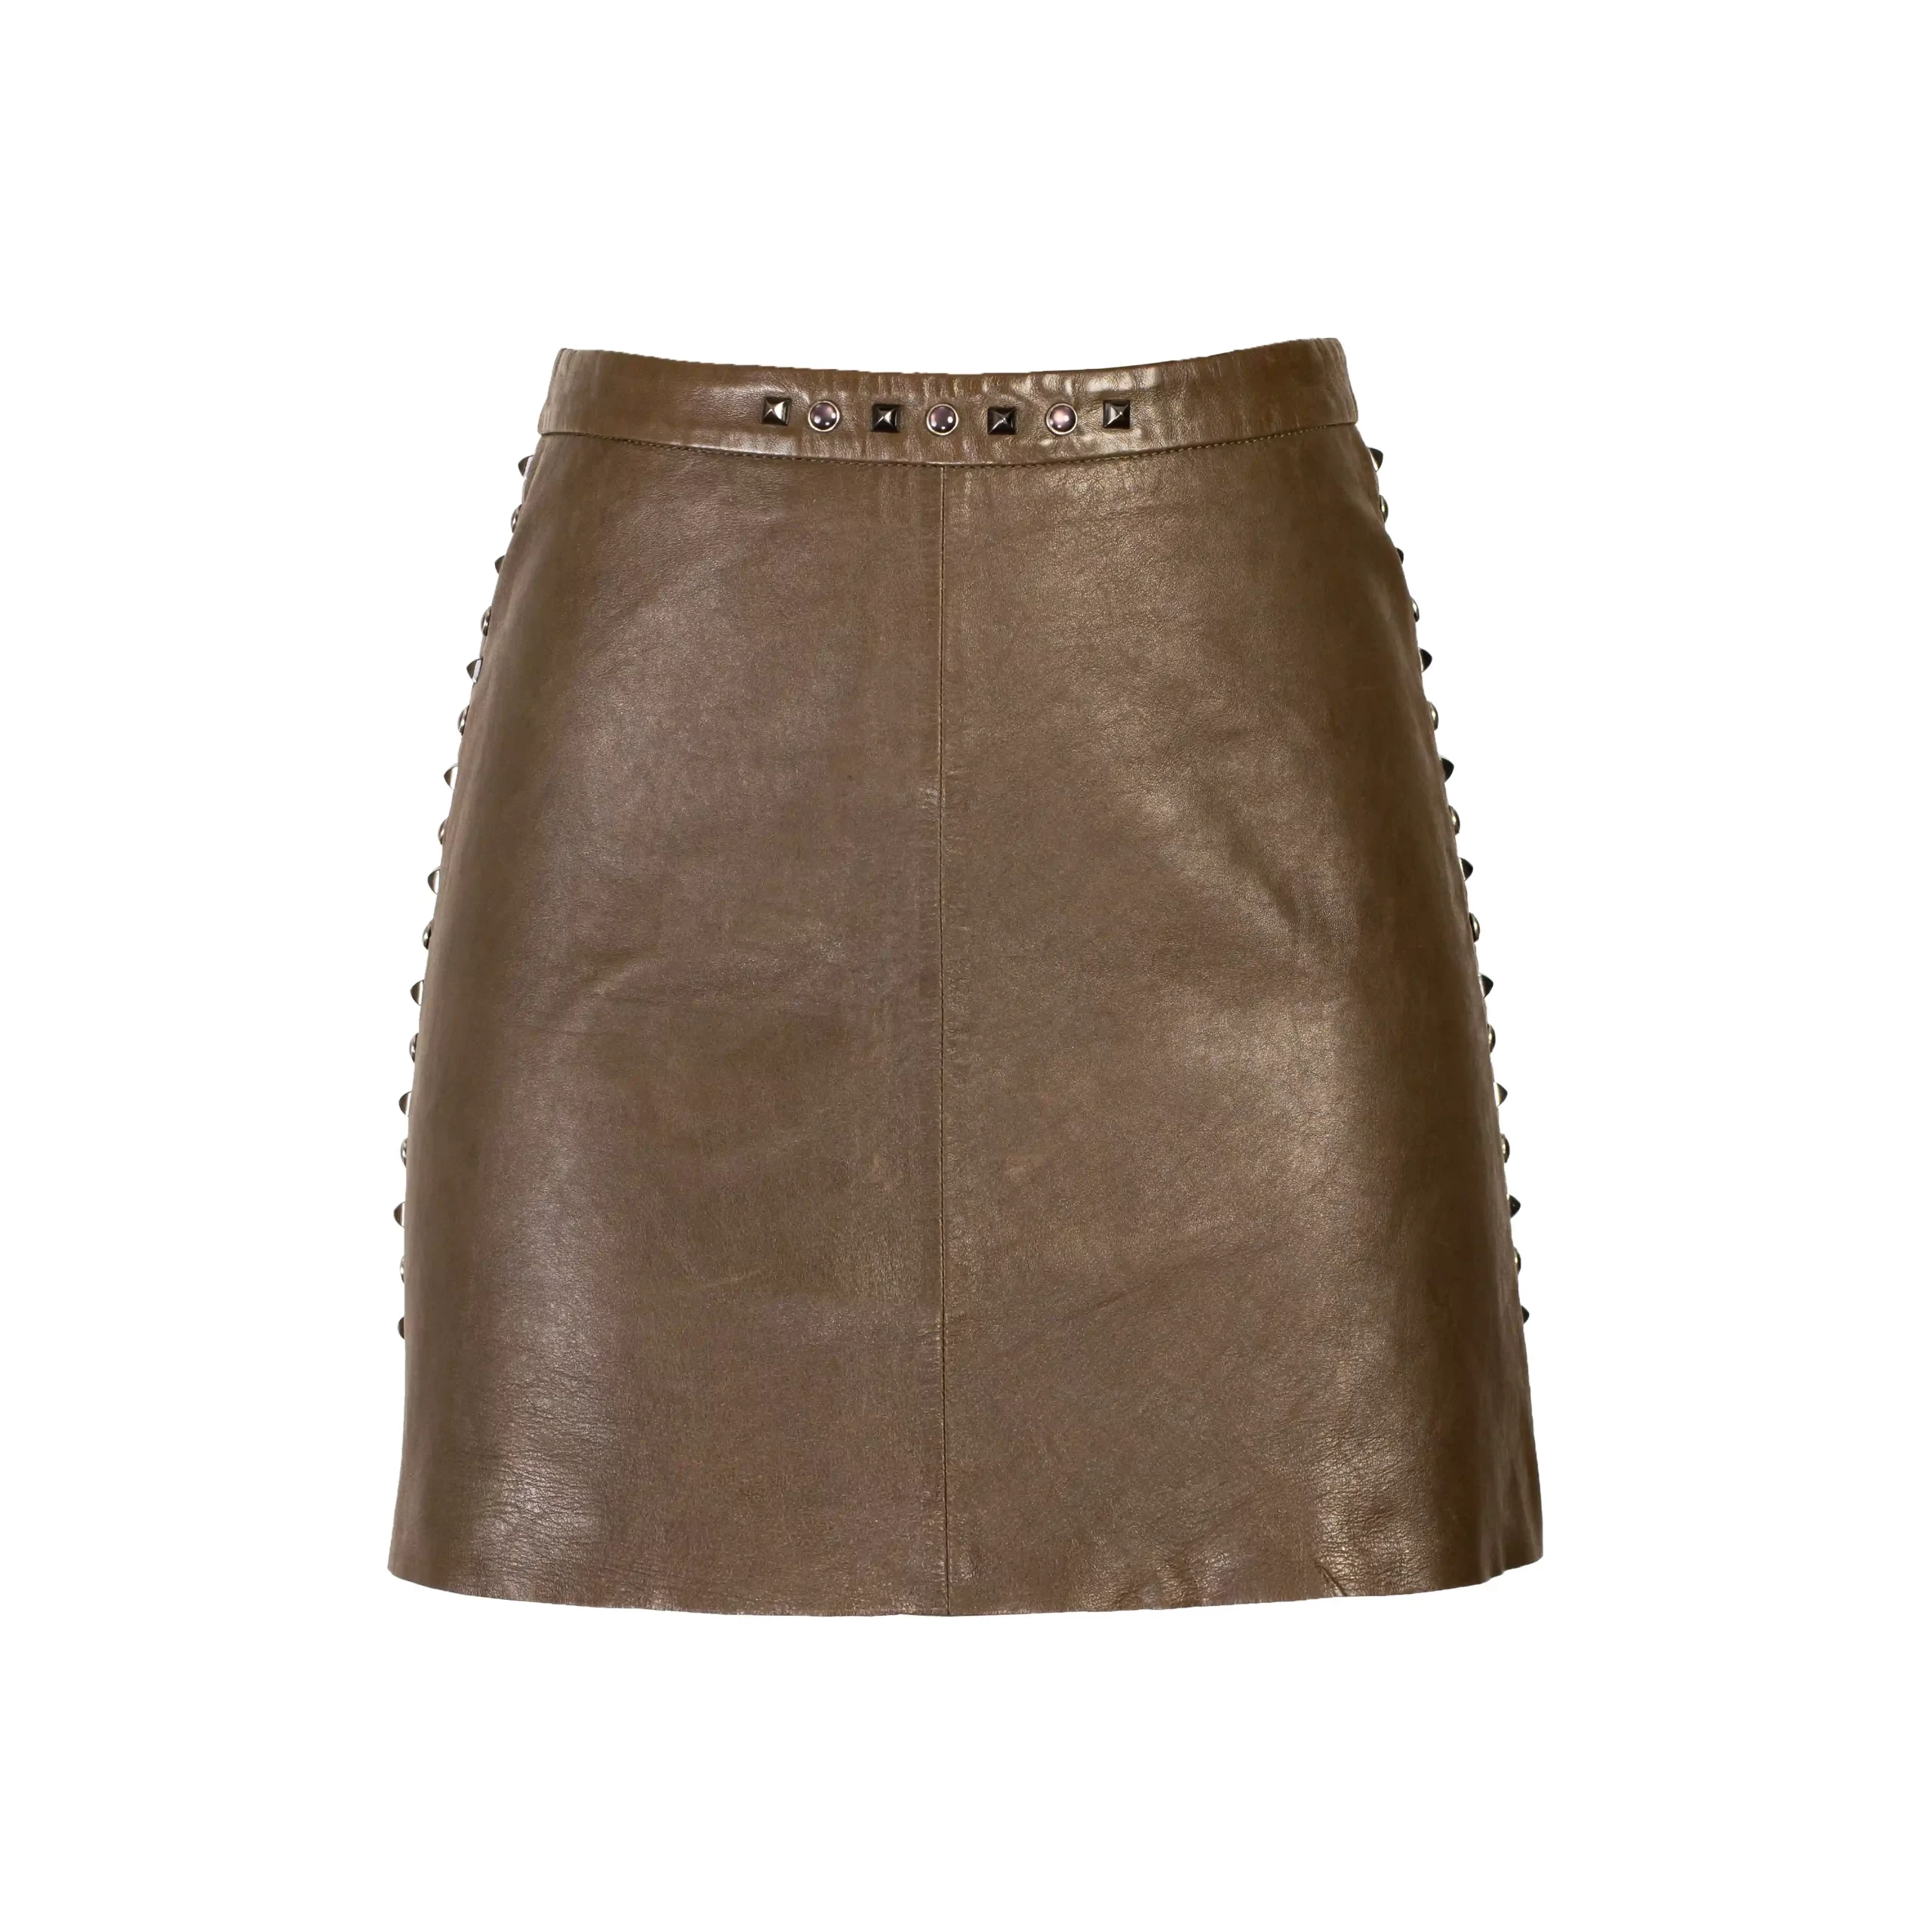 LEATHER SKIRT WITH DECORATIVE STUDS